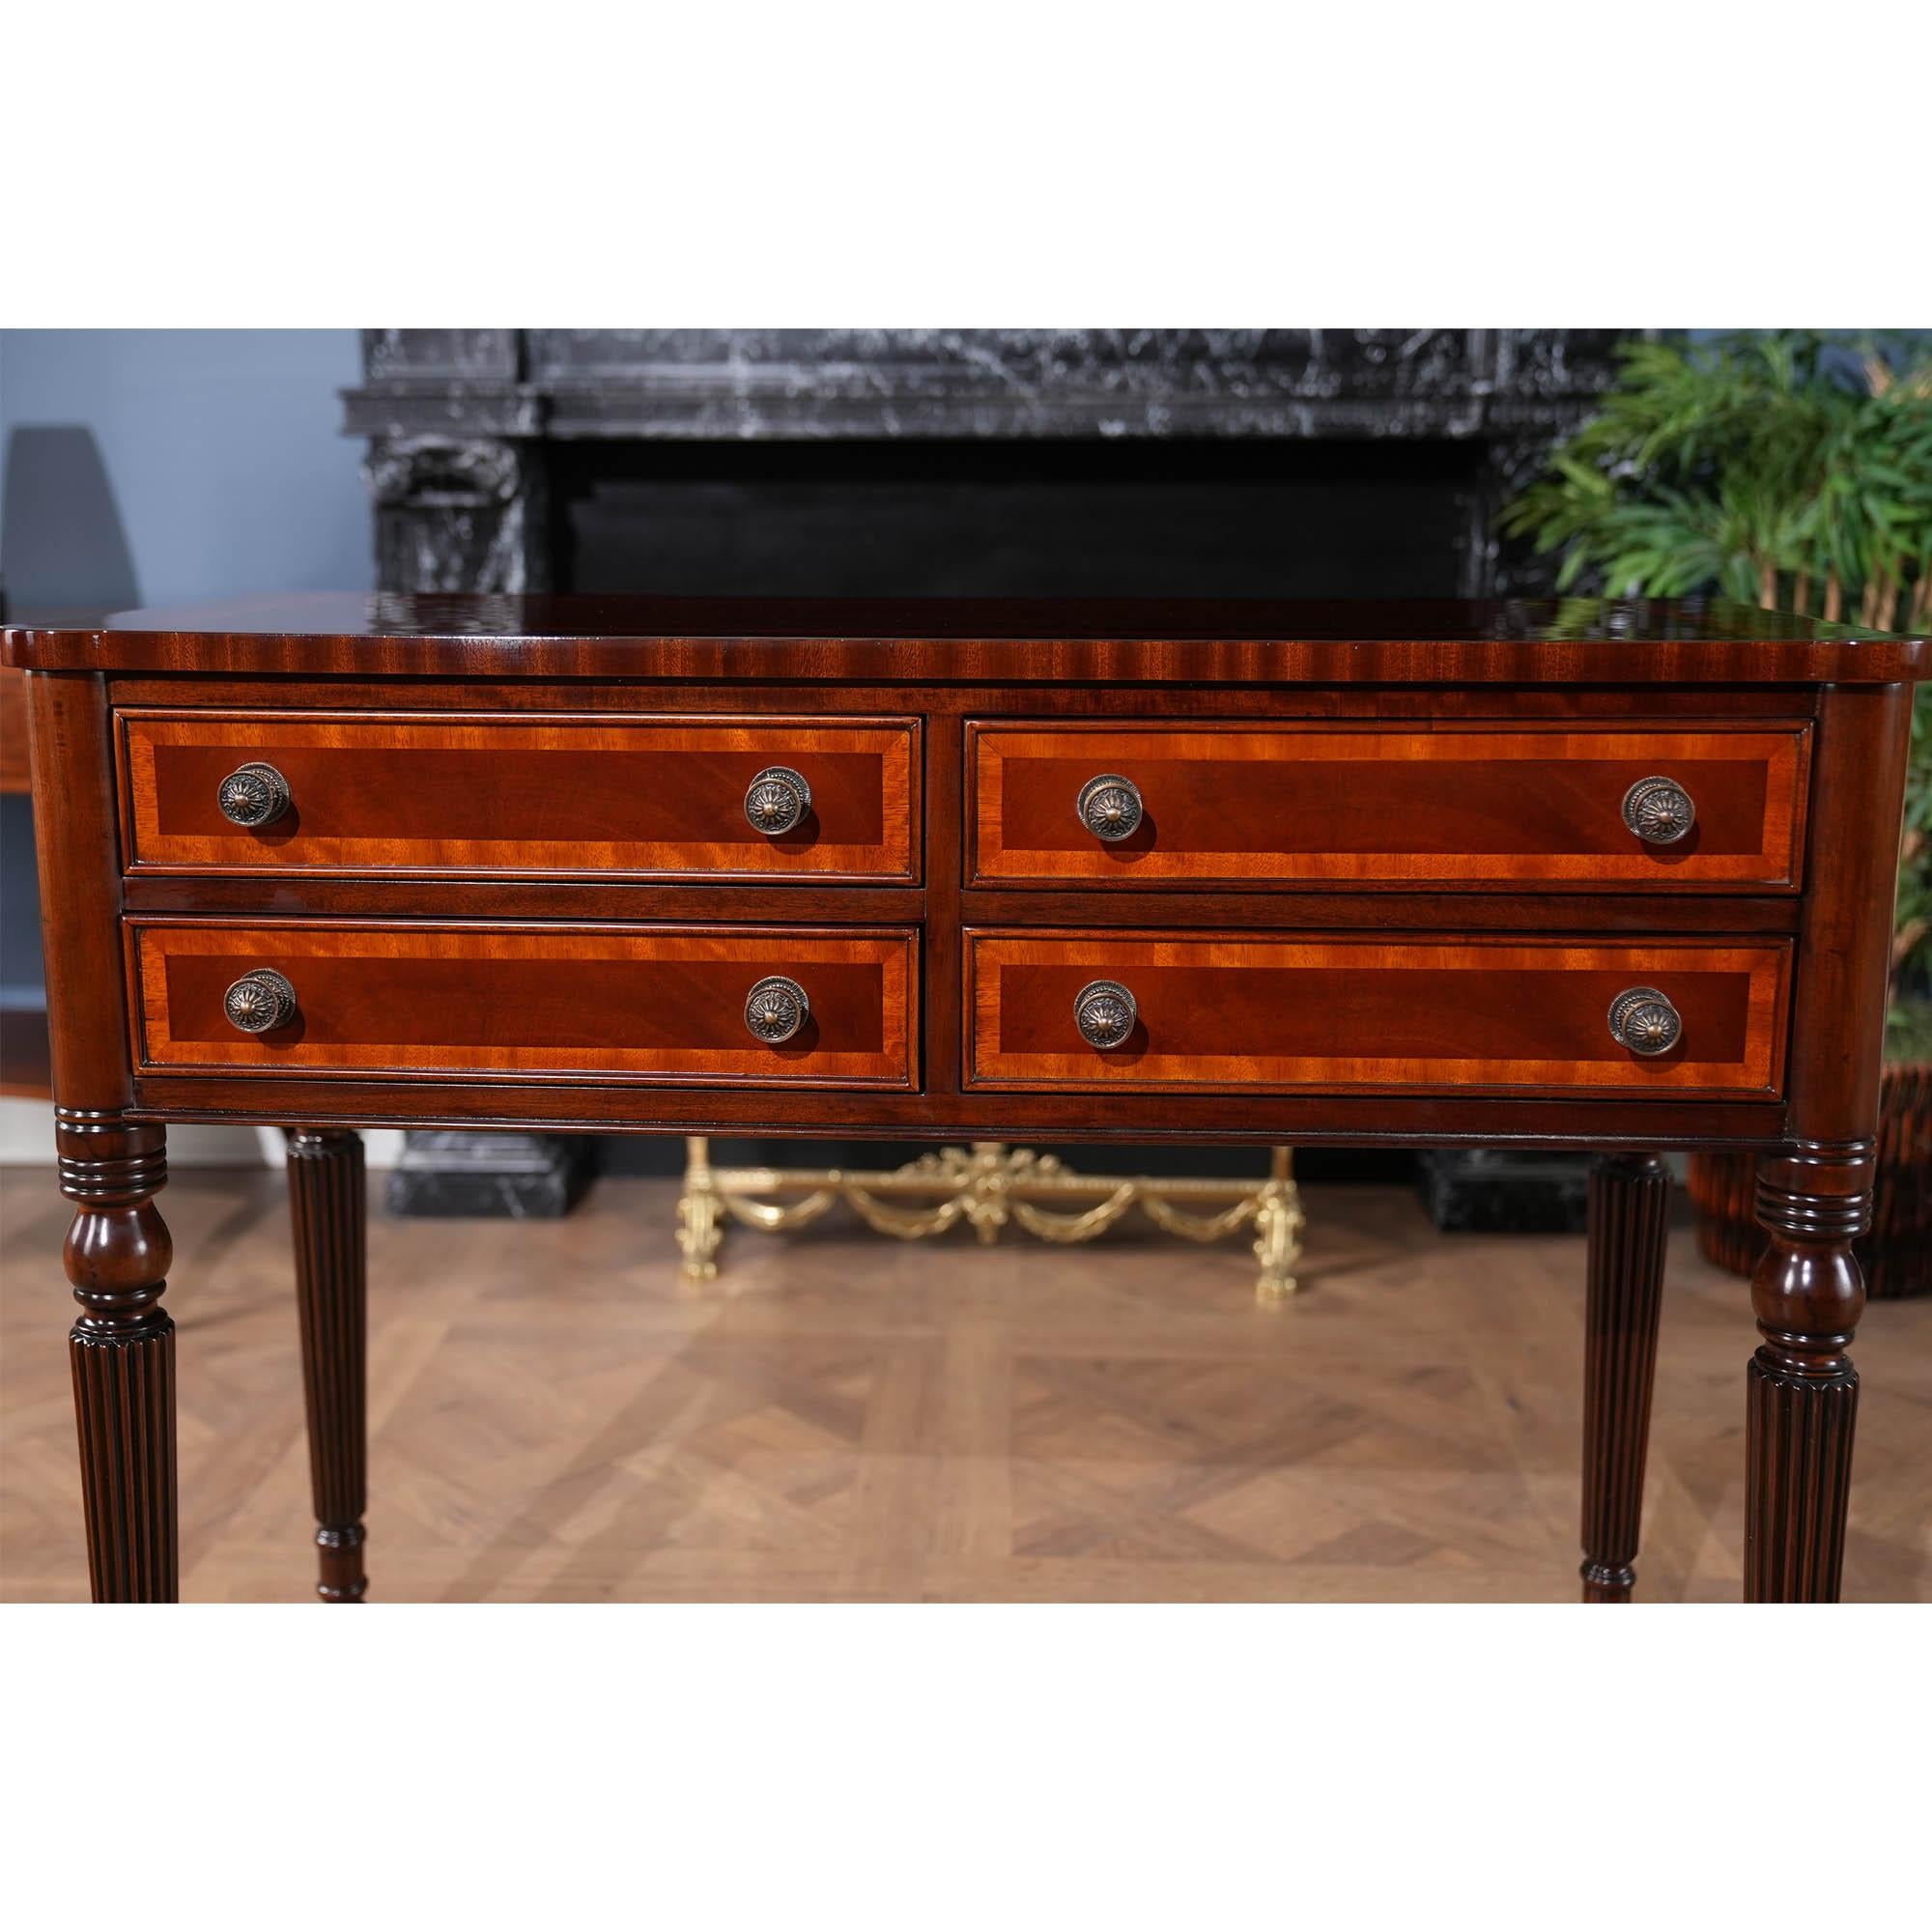 We designed and produced this Sheraton style Two Drawer Console Table as a matching item to sell along with our ever popular NSI087 Sheraton style stand and NSI118 Four Drawer Console Table. The two drawer hall table can be used throughout the home